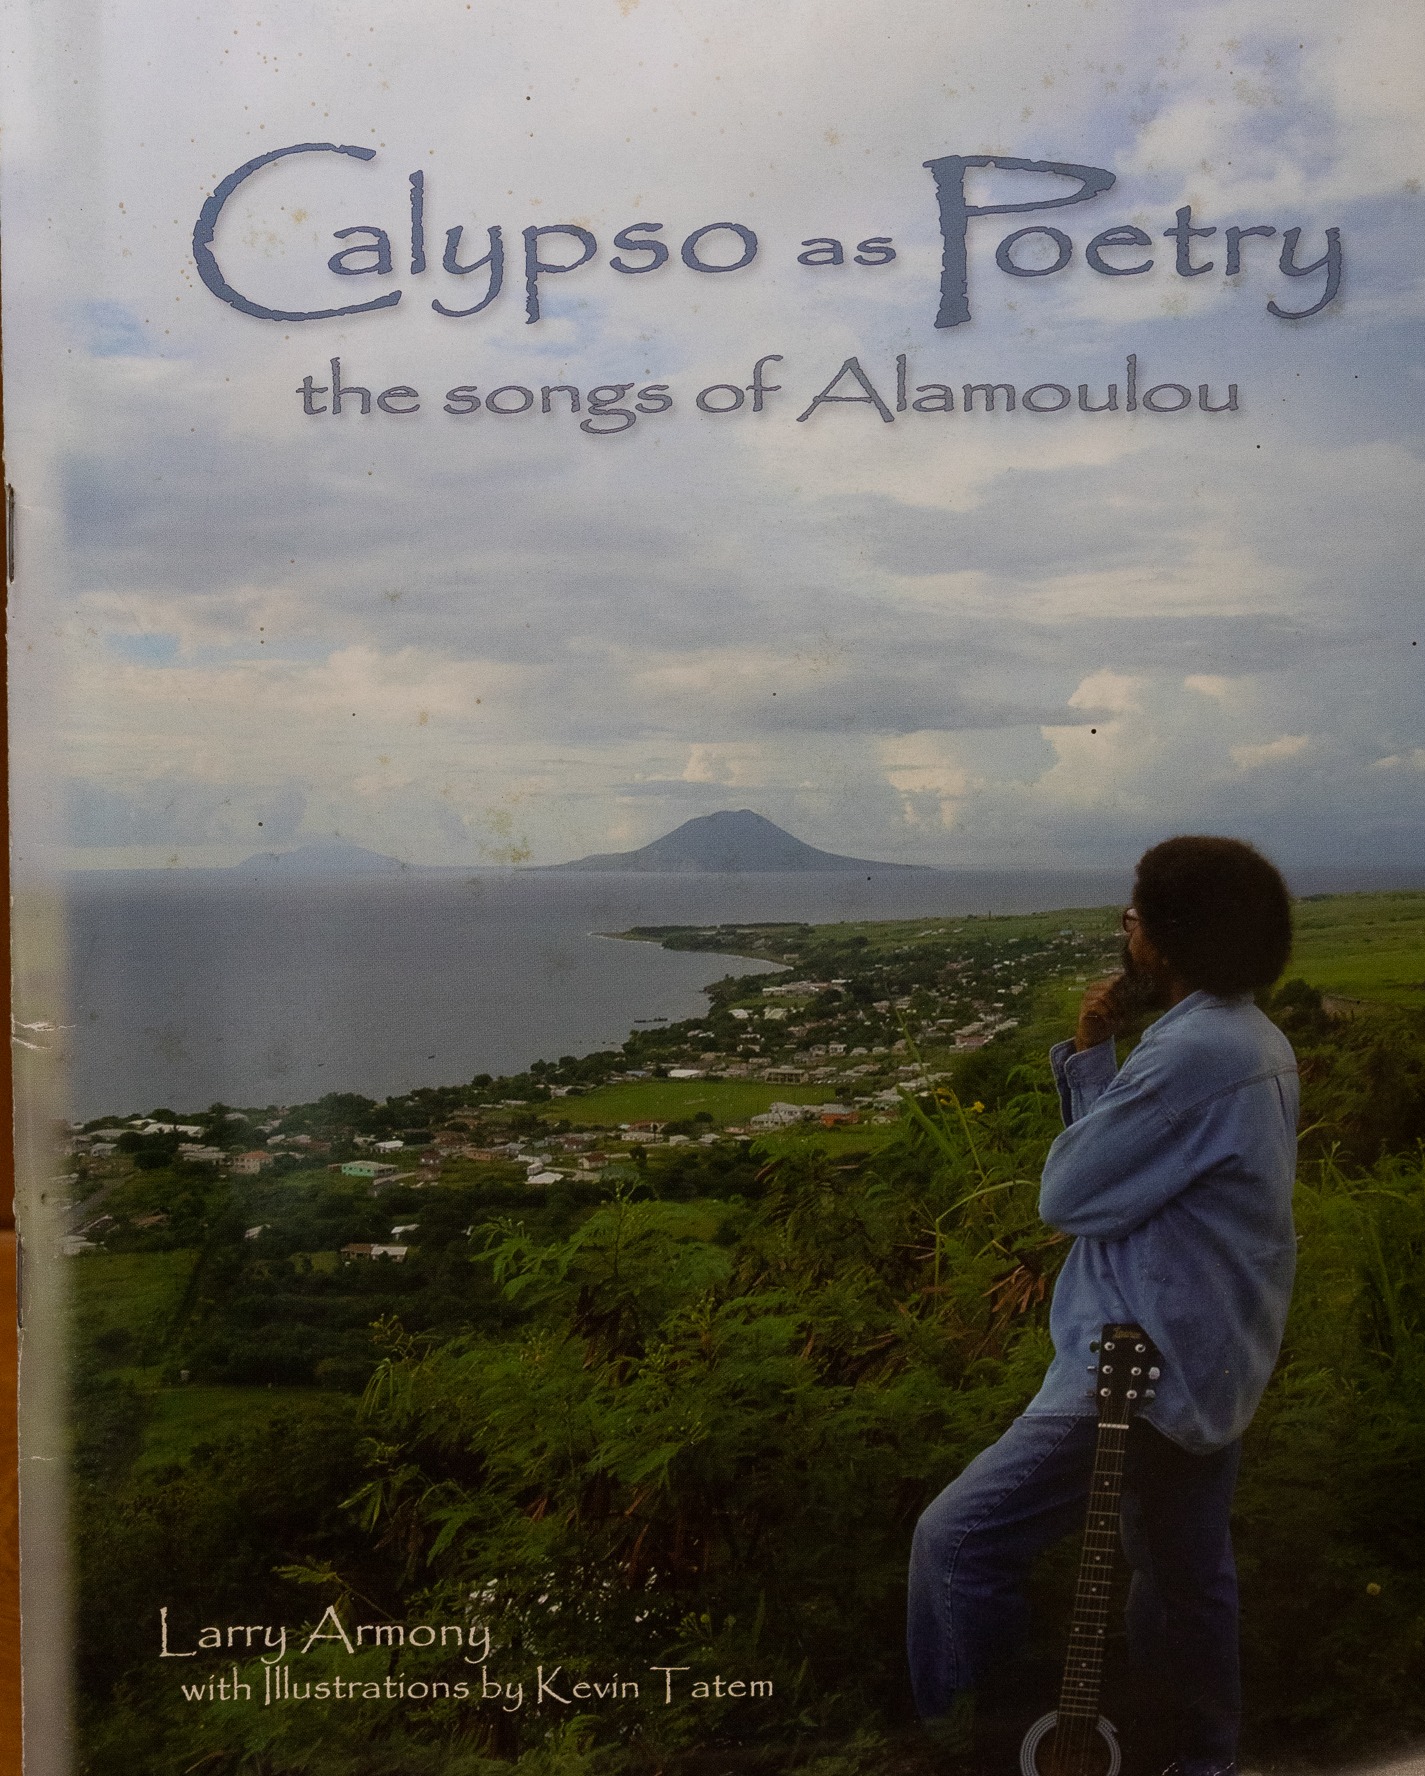 Calypso as Poetry the Songs of Alamoulou